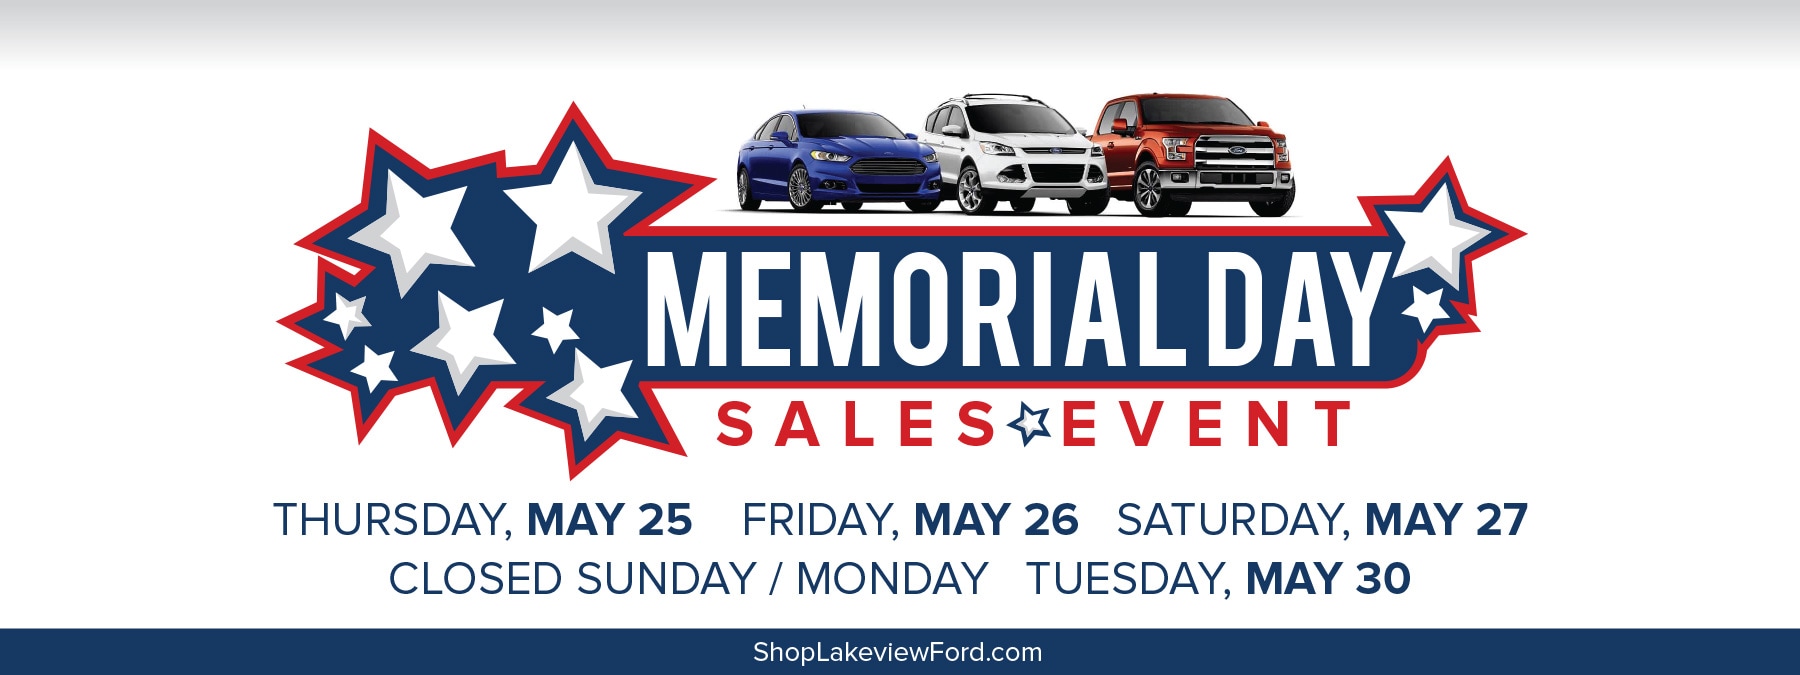 Memorial Day Sales Event Lakeview FordLincoln Inc.